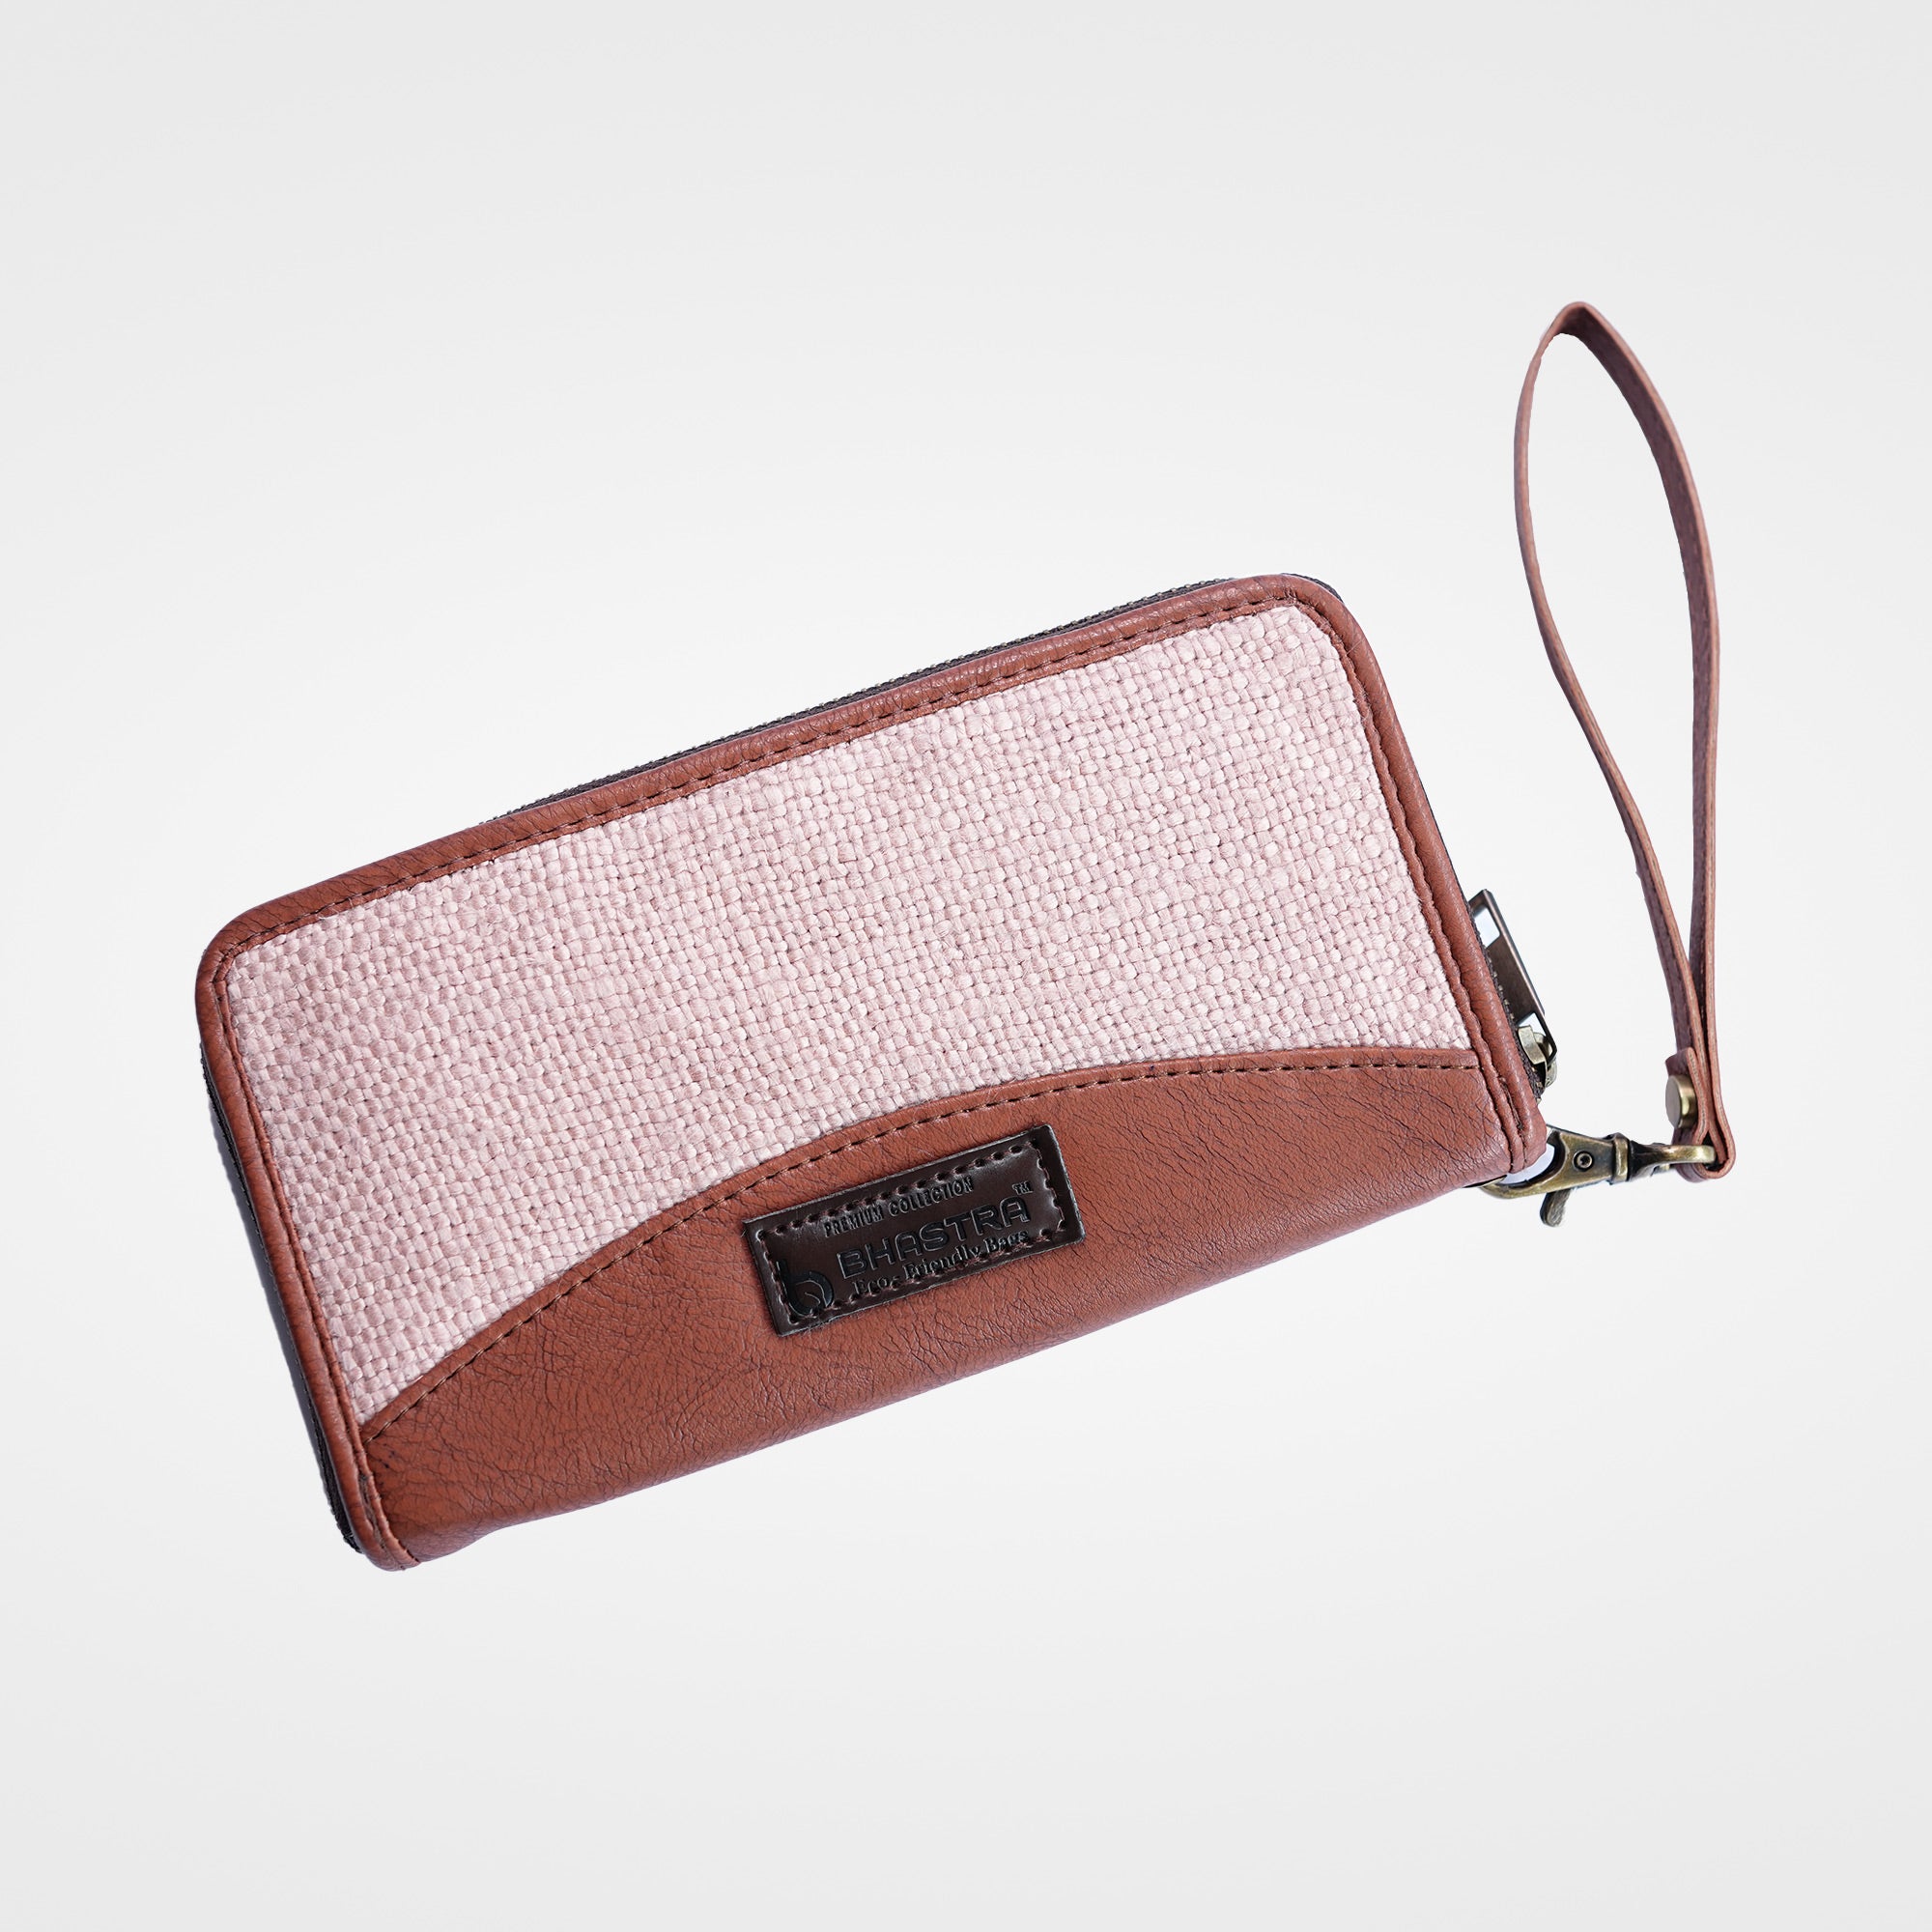 Daisy Rose Luxury Coin Purse Change Wallet Pouch for Women - PU Vegan  Leather Card Holder with Oversized Metal Keychain and Clasp - Taupe Braid -  Walmart.com